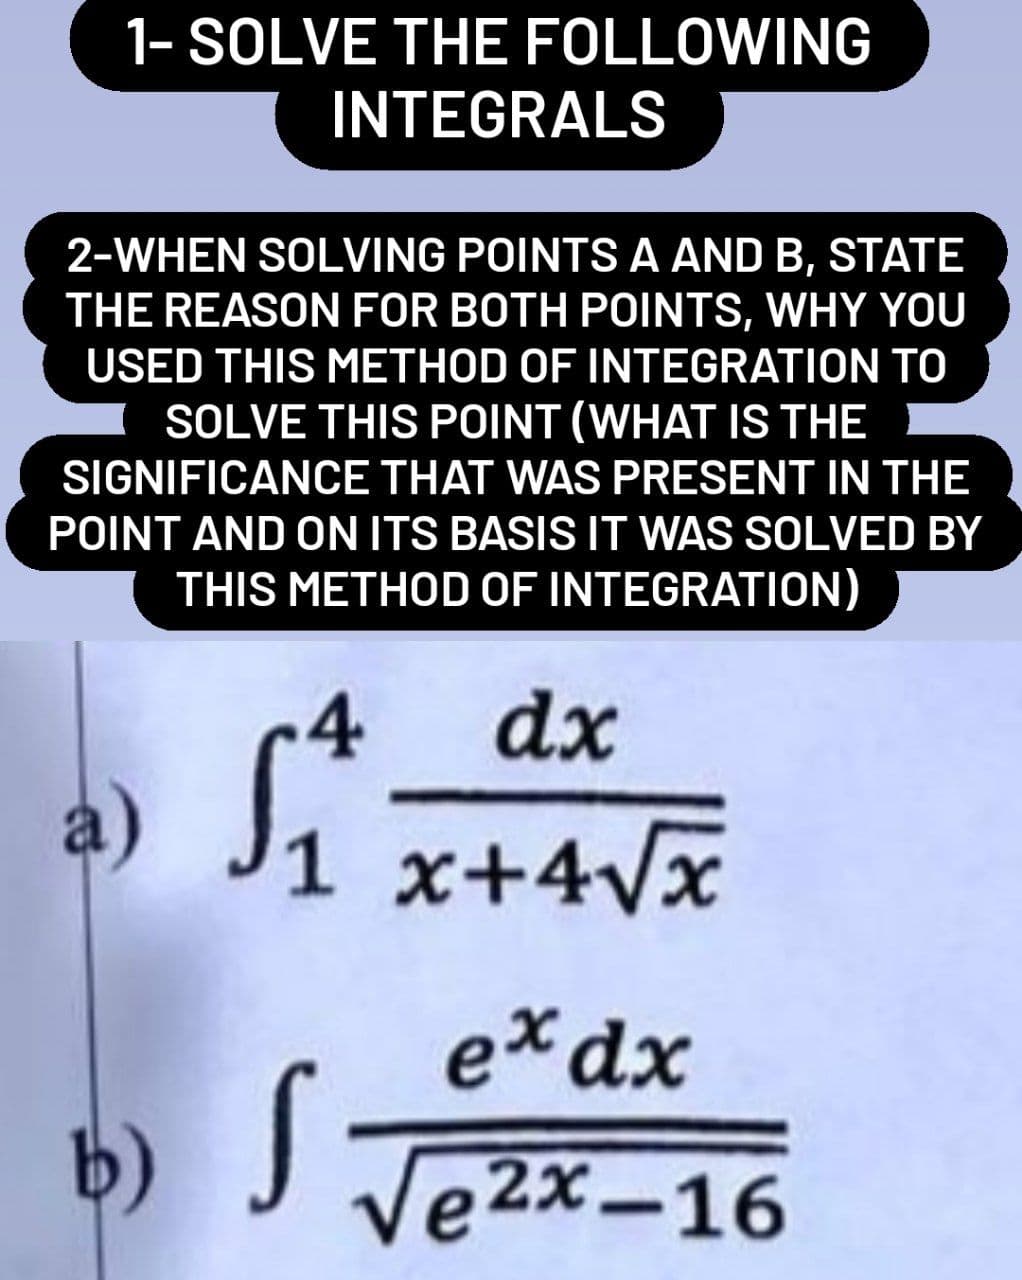 1- SOLVE THE FOLLOWING
INTEGRALS
2-WHEN SOLVING POINTS A AND B, STATE
THE REASON FOR BOTH POINTS, WHY YOU
USED THIS METHOD OF INTEGRATION TO
SOLVE THIS POINT (WHAT IS THE
SIGNIFICANCE THAT WAS PRESENT IN THE
POINT AND ON ITS BASIS IT WAS SOLVED BY
THIS METHOD OF INTEGRATION)
-4
dx
a)
1 x+4√x
ex dx
b) √ √e²x-16
S